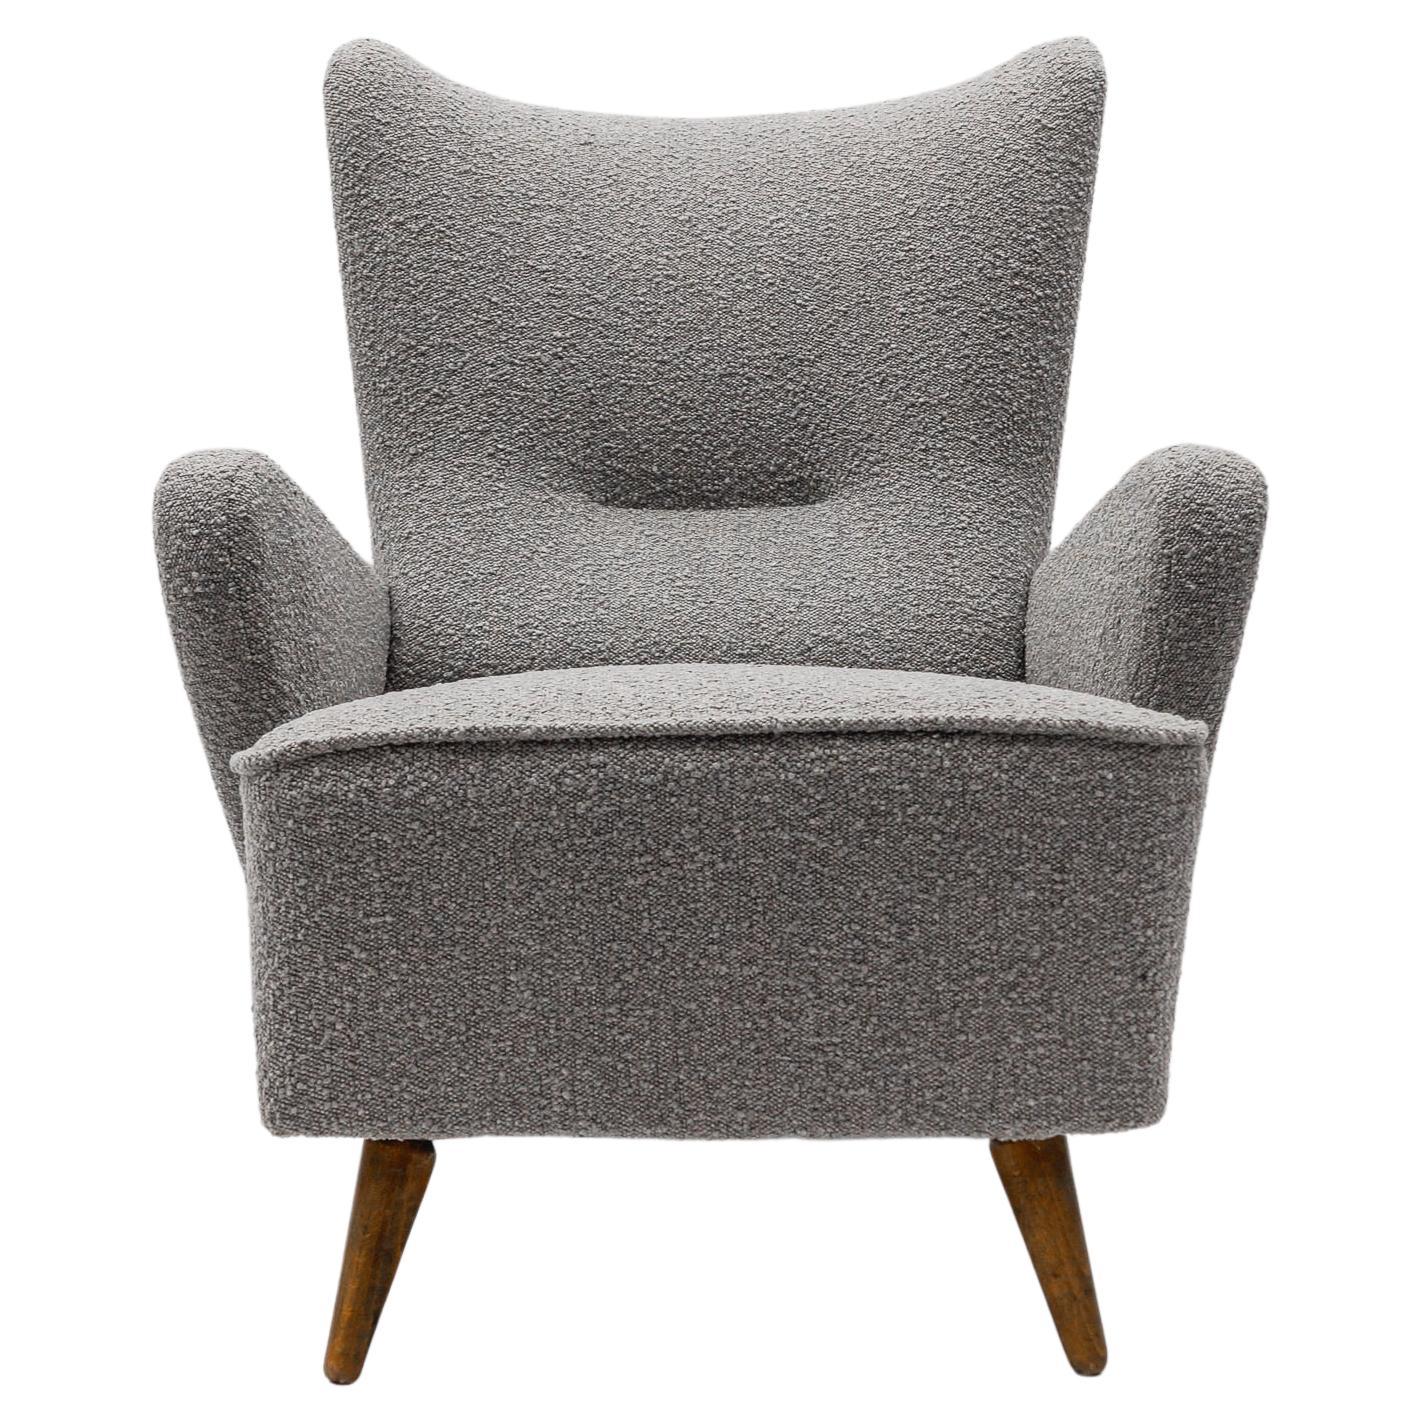 Large Grey Boucle Fabric Wingback Armchair, Italy, 1950s For Sale